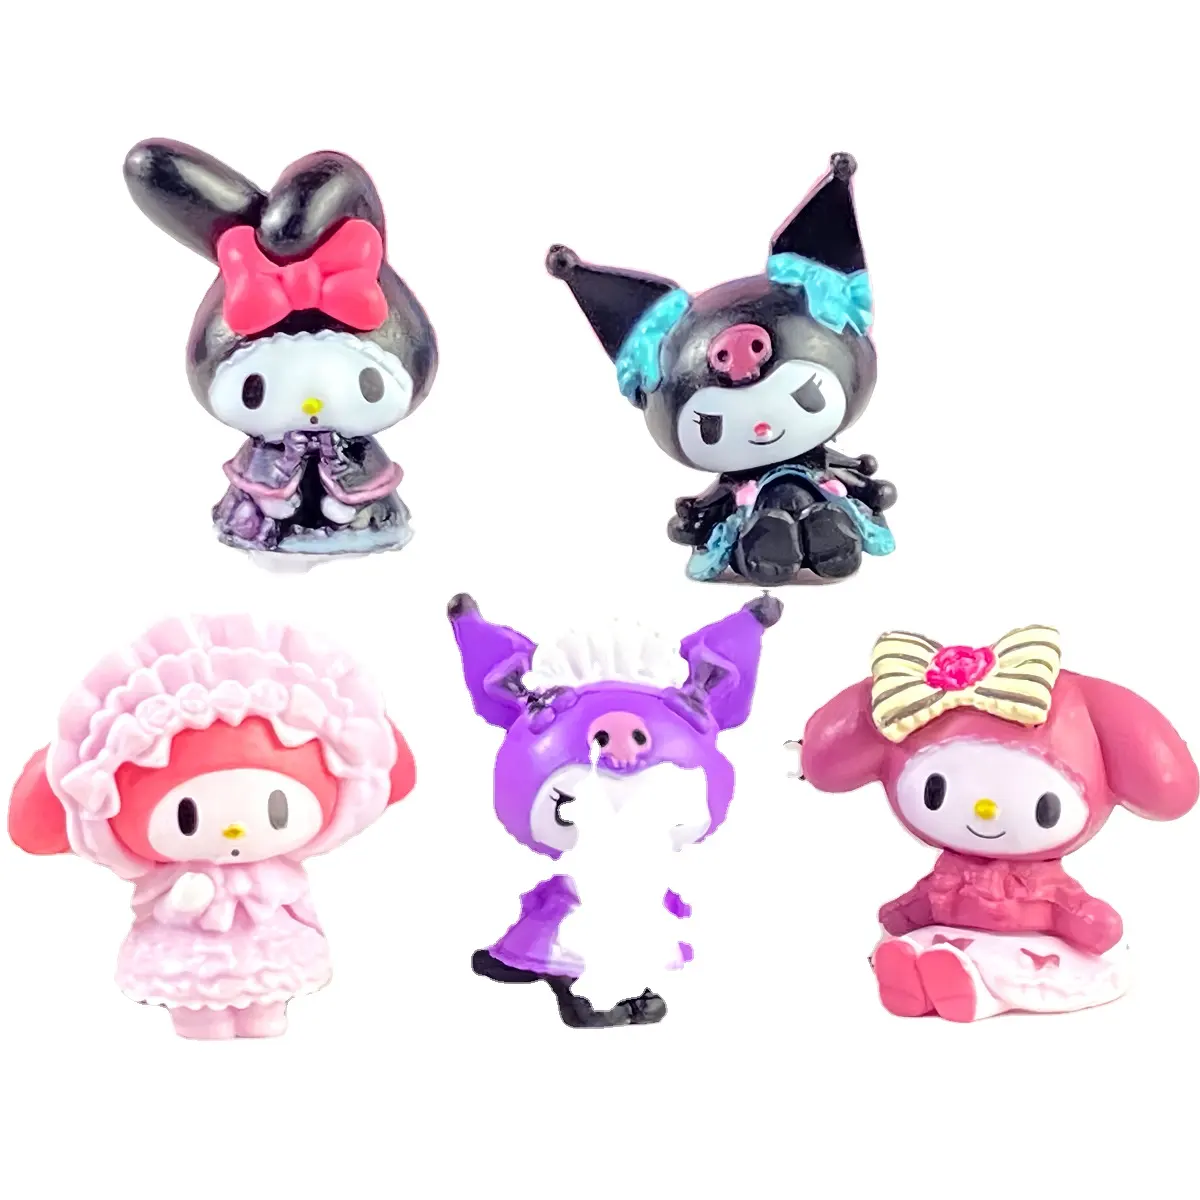 QY New products are selling well Kuromi My Melody fBlind Box Kuromi Pochacco Peripheral Pocket Figures